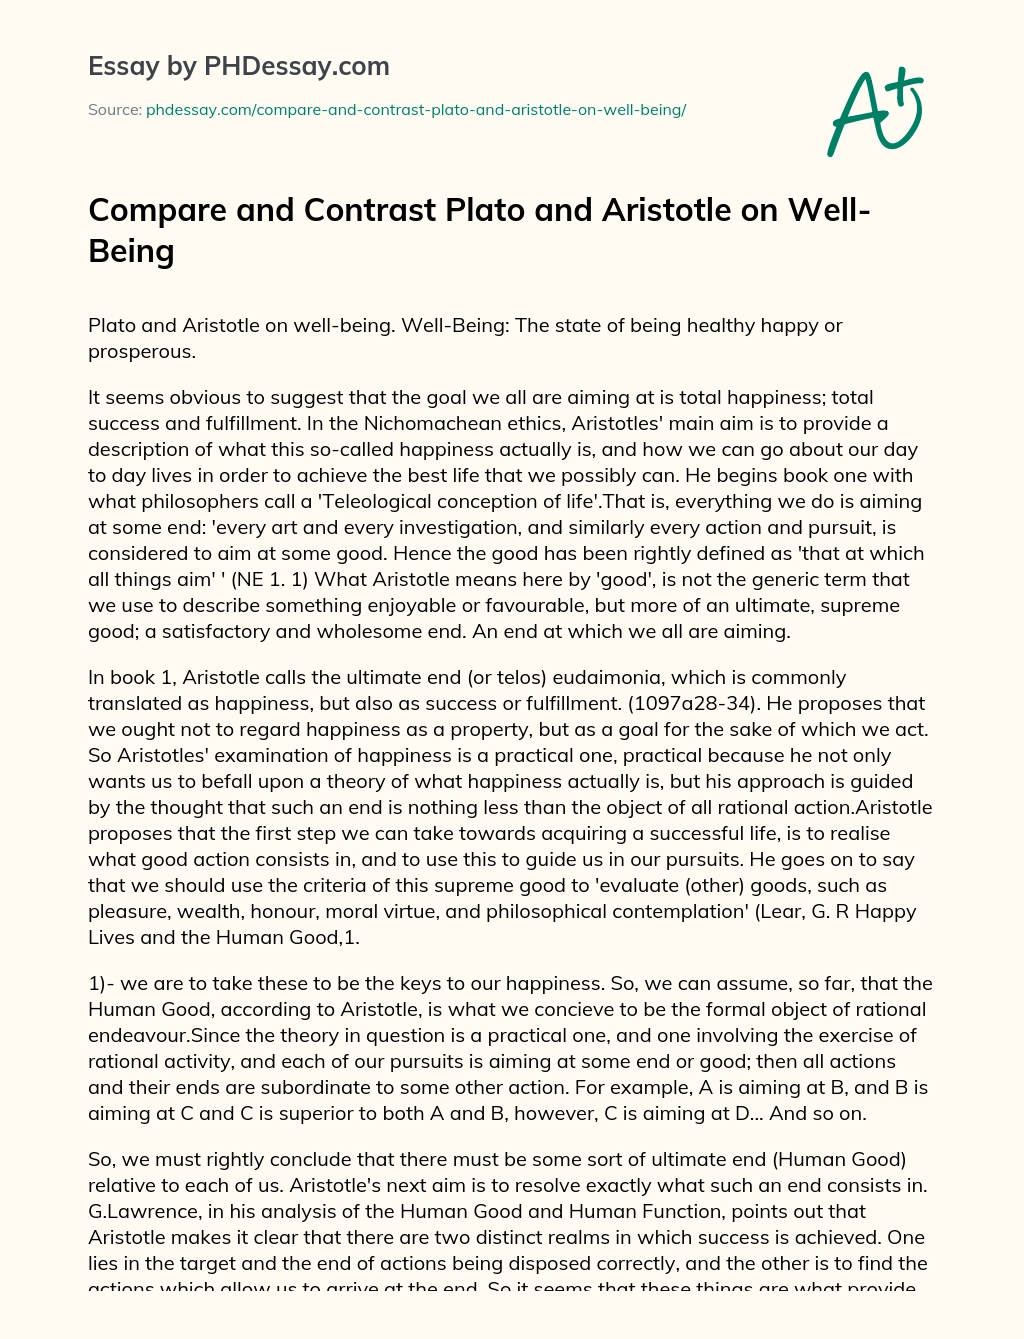 Compare and Contrast Plato and Aristotle on Well-Being essay